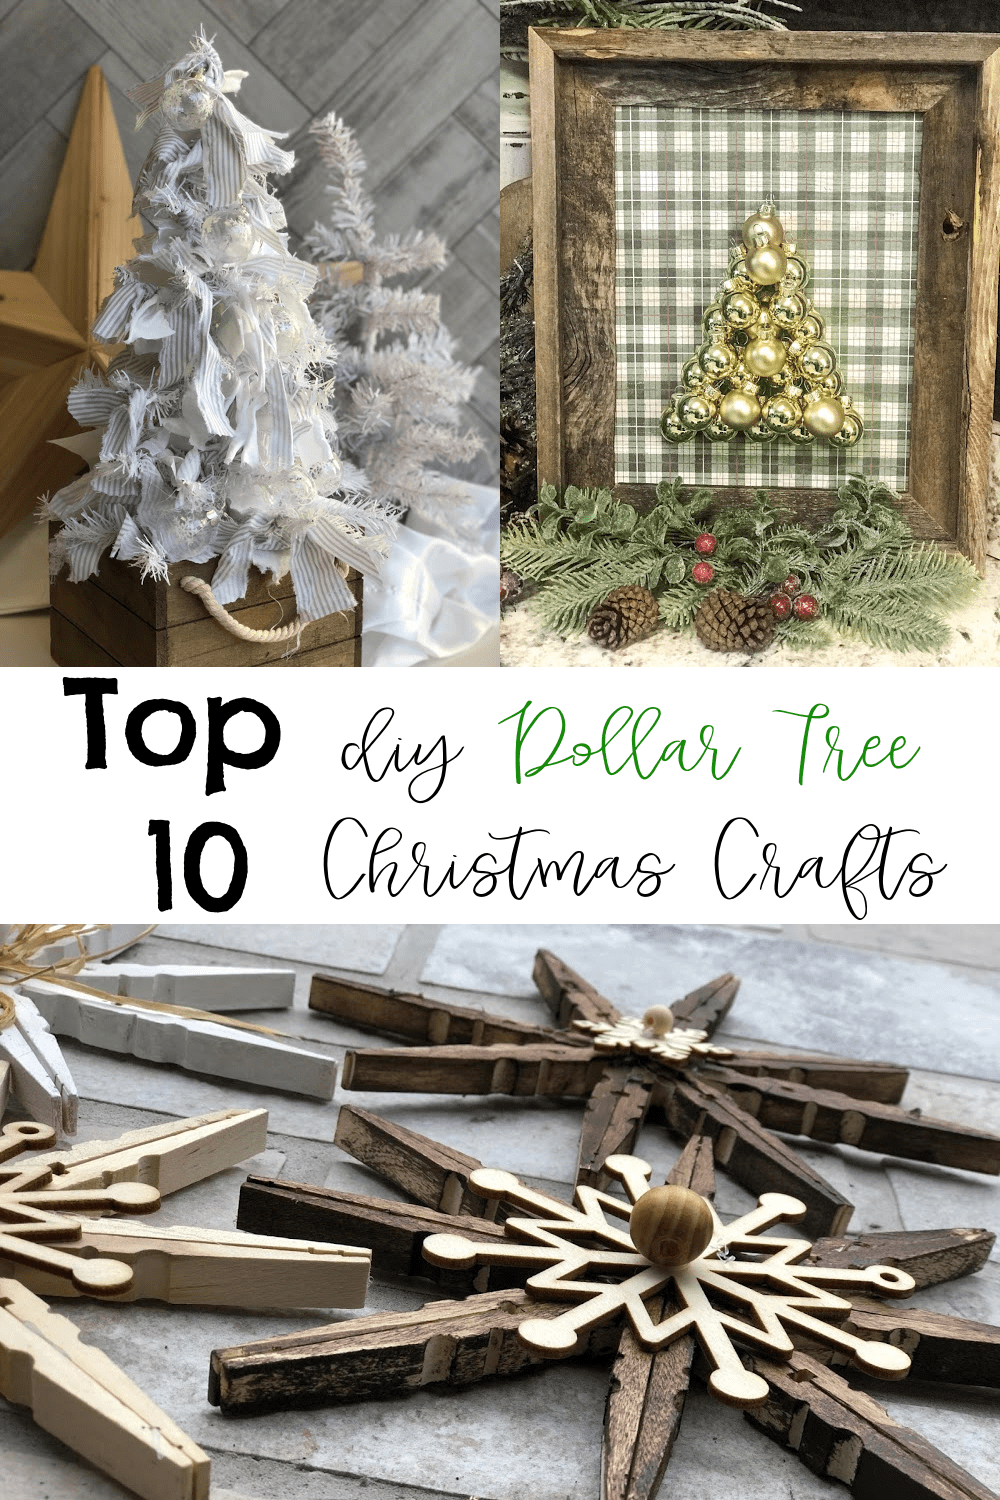 Top 10 Dollar Tree Christmas Projects - Re-Fabbed -   18 diy christmas decorations dollar tree 2020 ideas